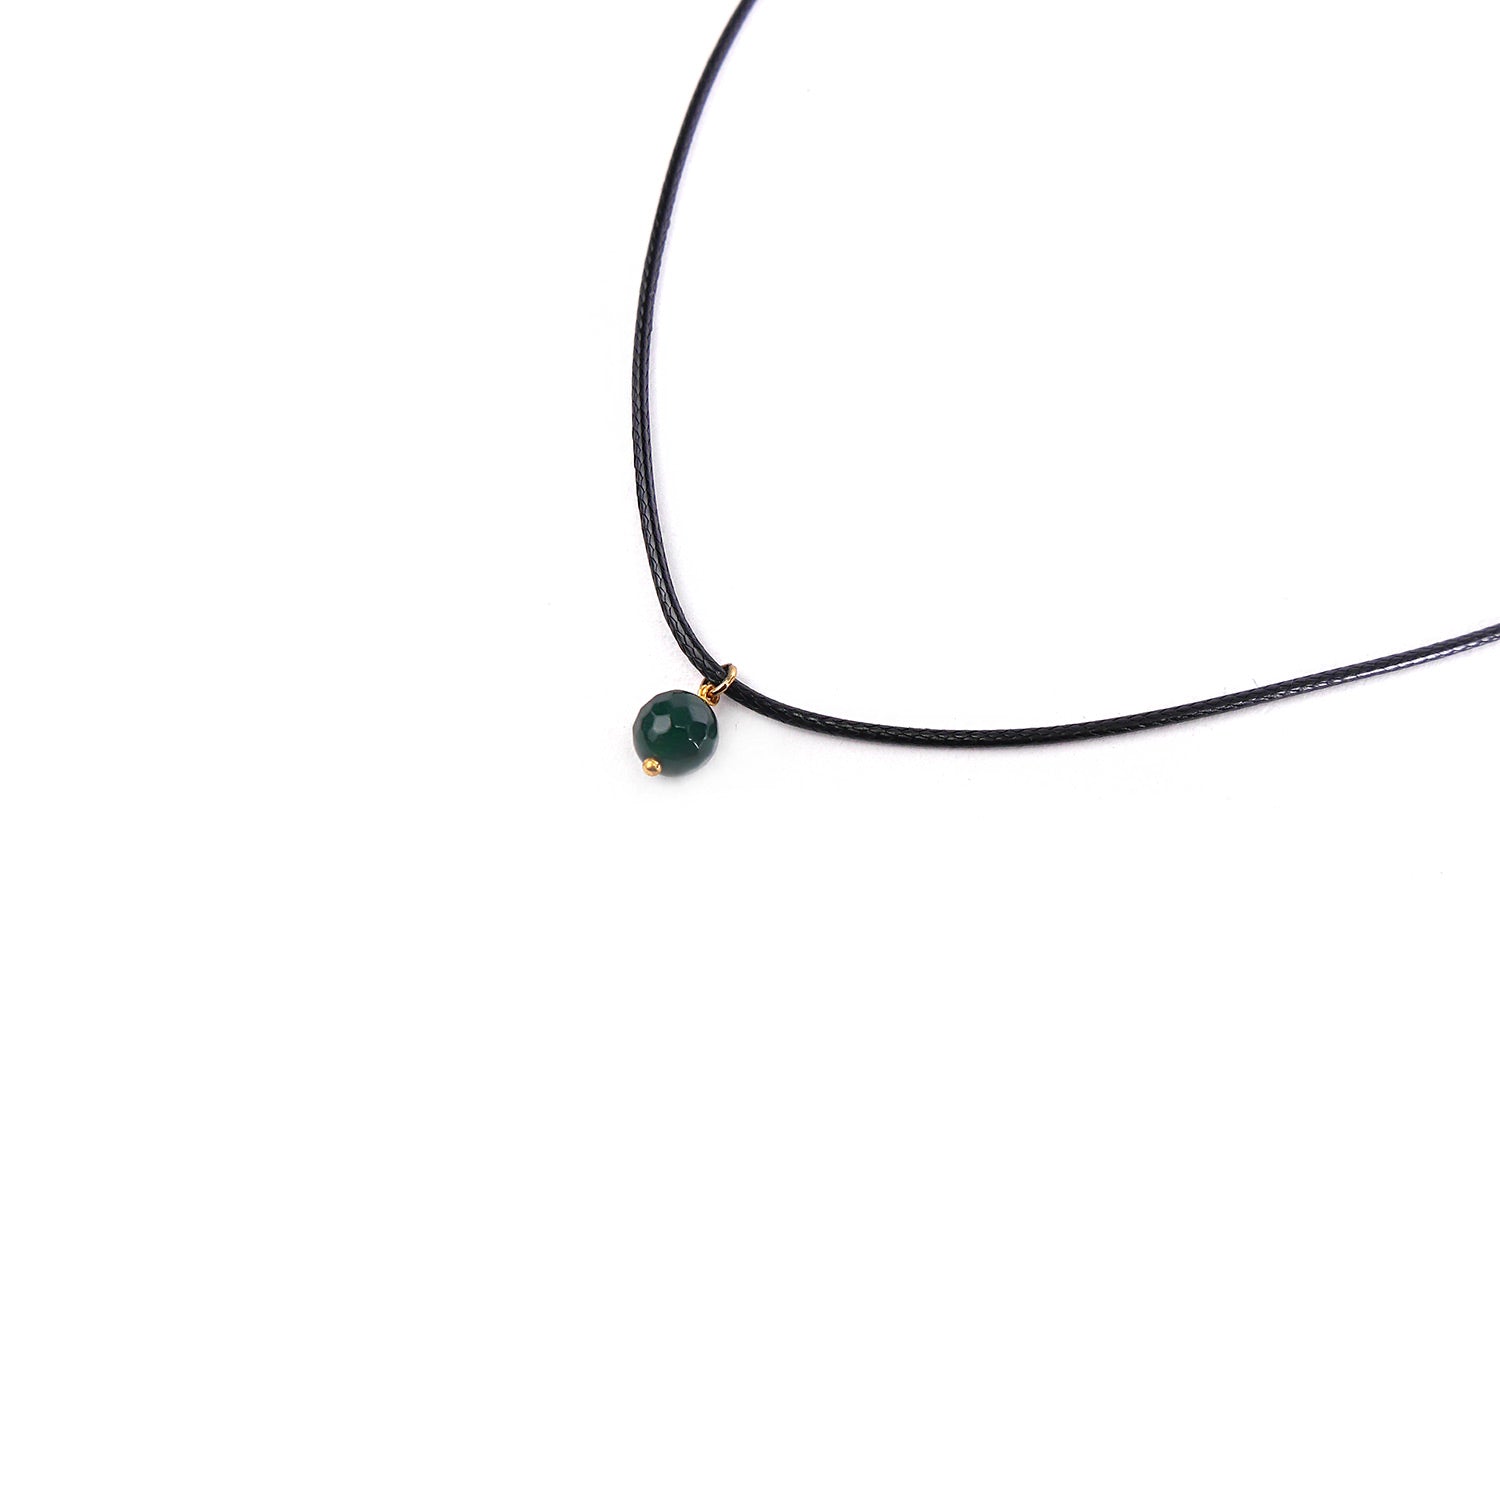 Faux Leather Necklace with Deep Green Crystal